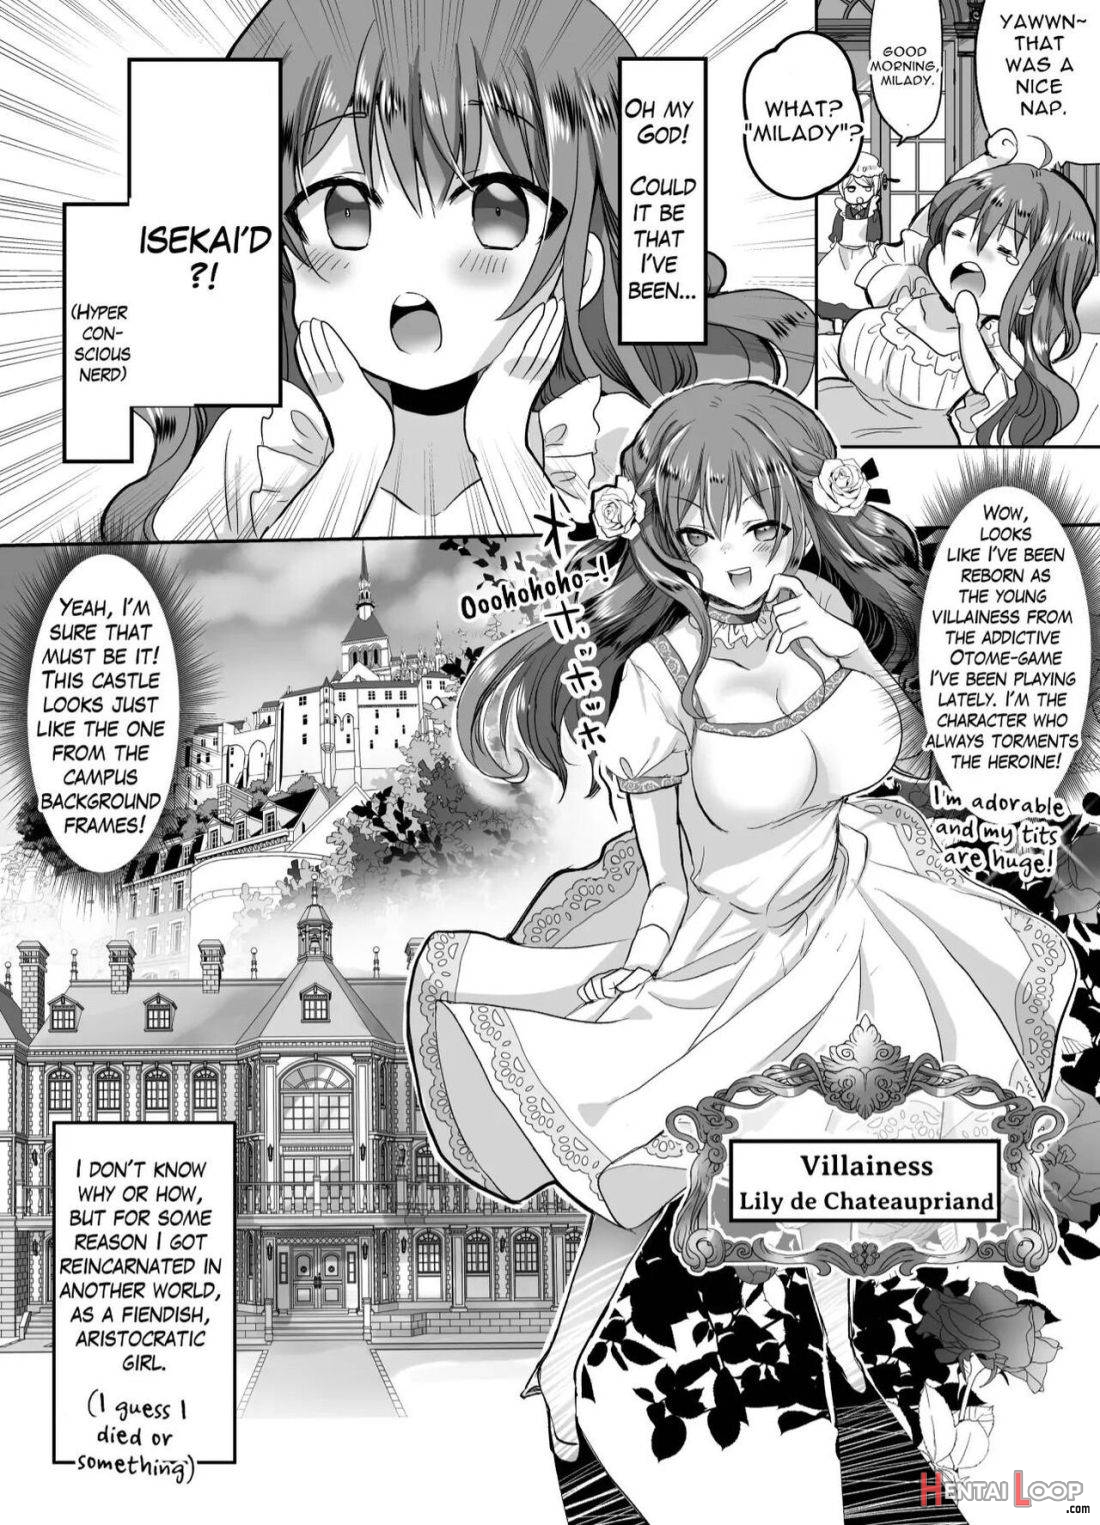  JK’s Tragic Isekai Reincarnation as the Villainess ~But My Precious Side Character!~ page 2